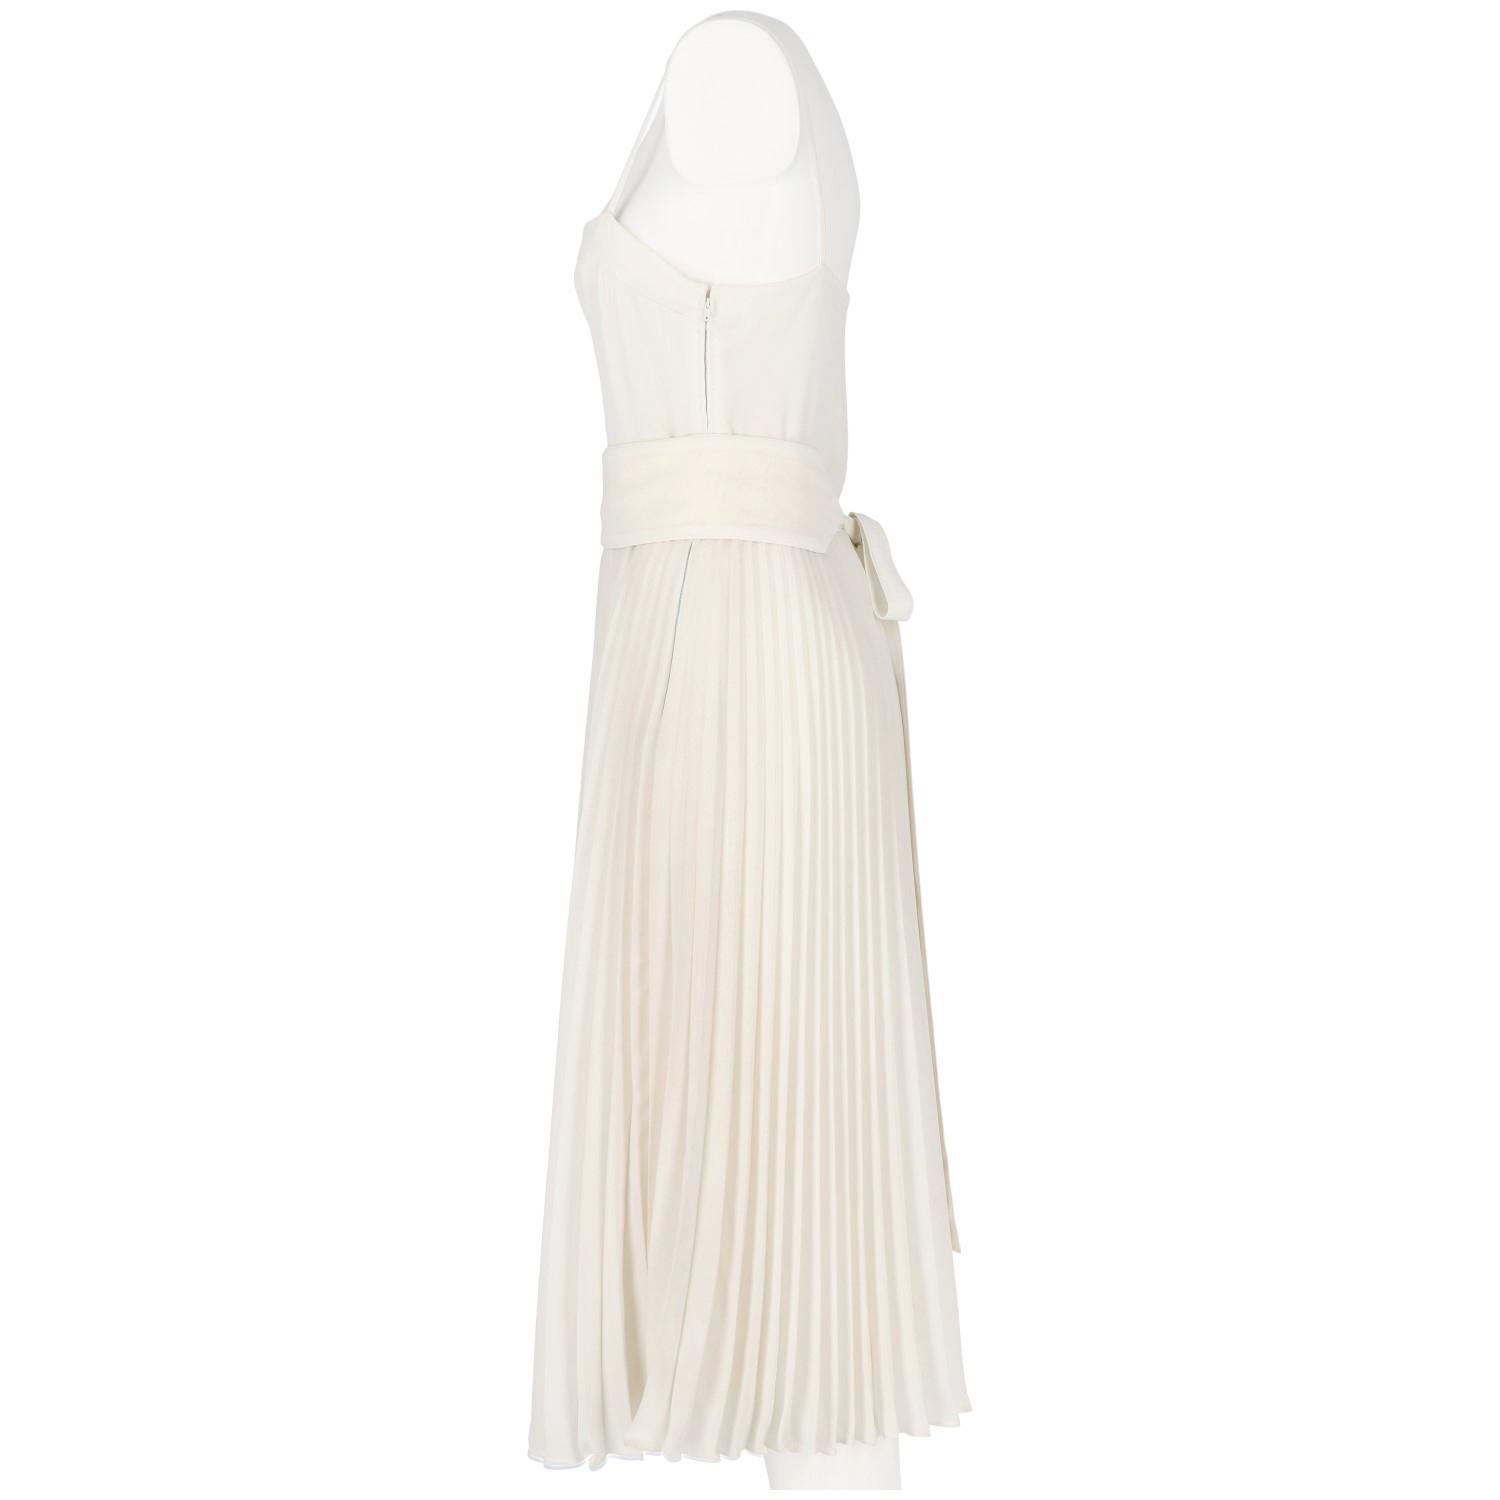 Nina Ricci Boutique white wedding dress. It features a pleated skirt with waistband and very thin straps. Lined and finely hand-finished. Lateral zip closure. Spare buttons included. The items is vintage, it was produced in the 80s and is in